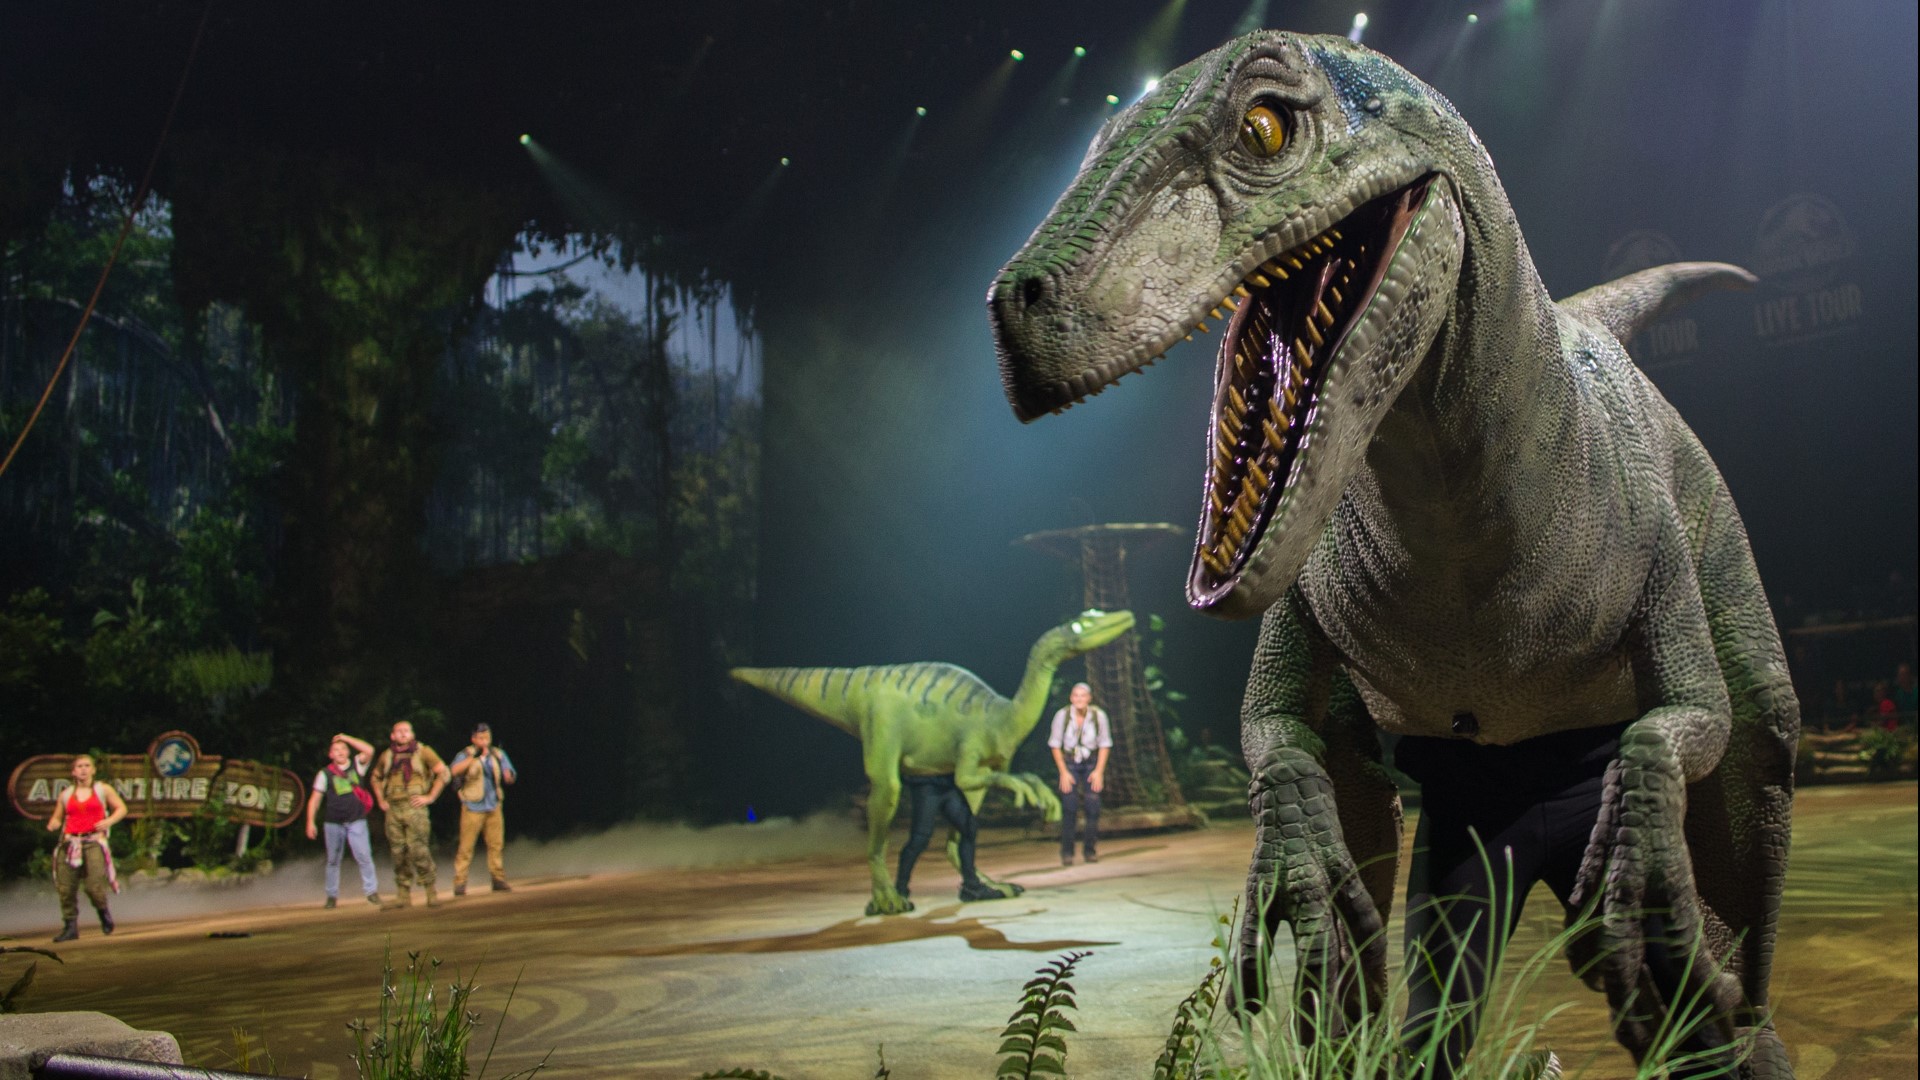 The Jurassic World Live Tour will offer multiple shows at the Rocket Mortgage FieldHouse from Oct. 7-9.